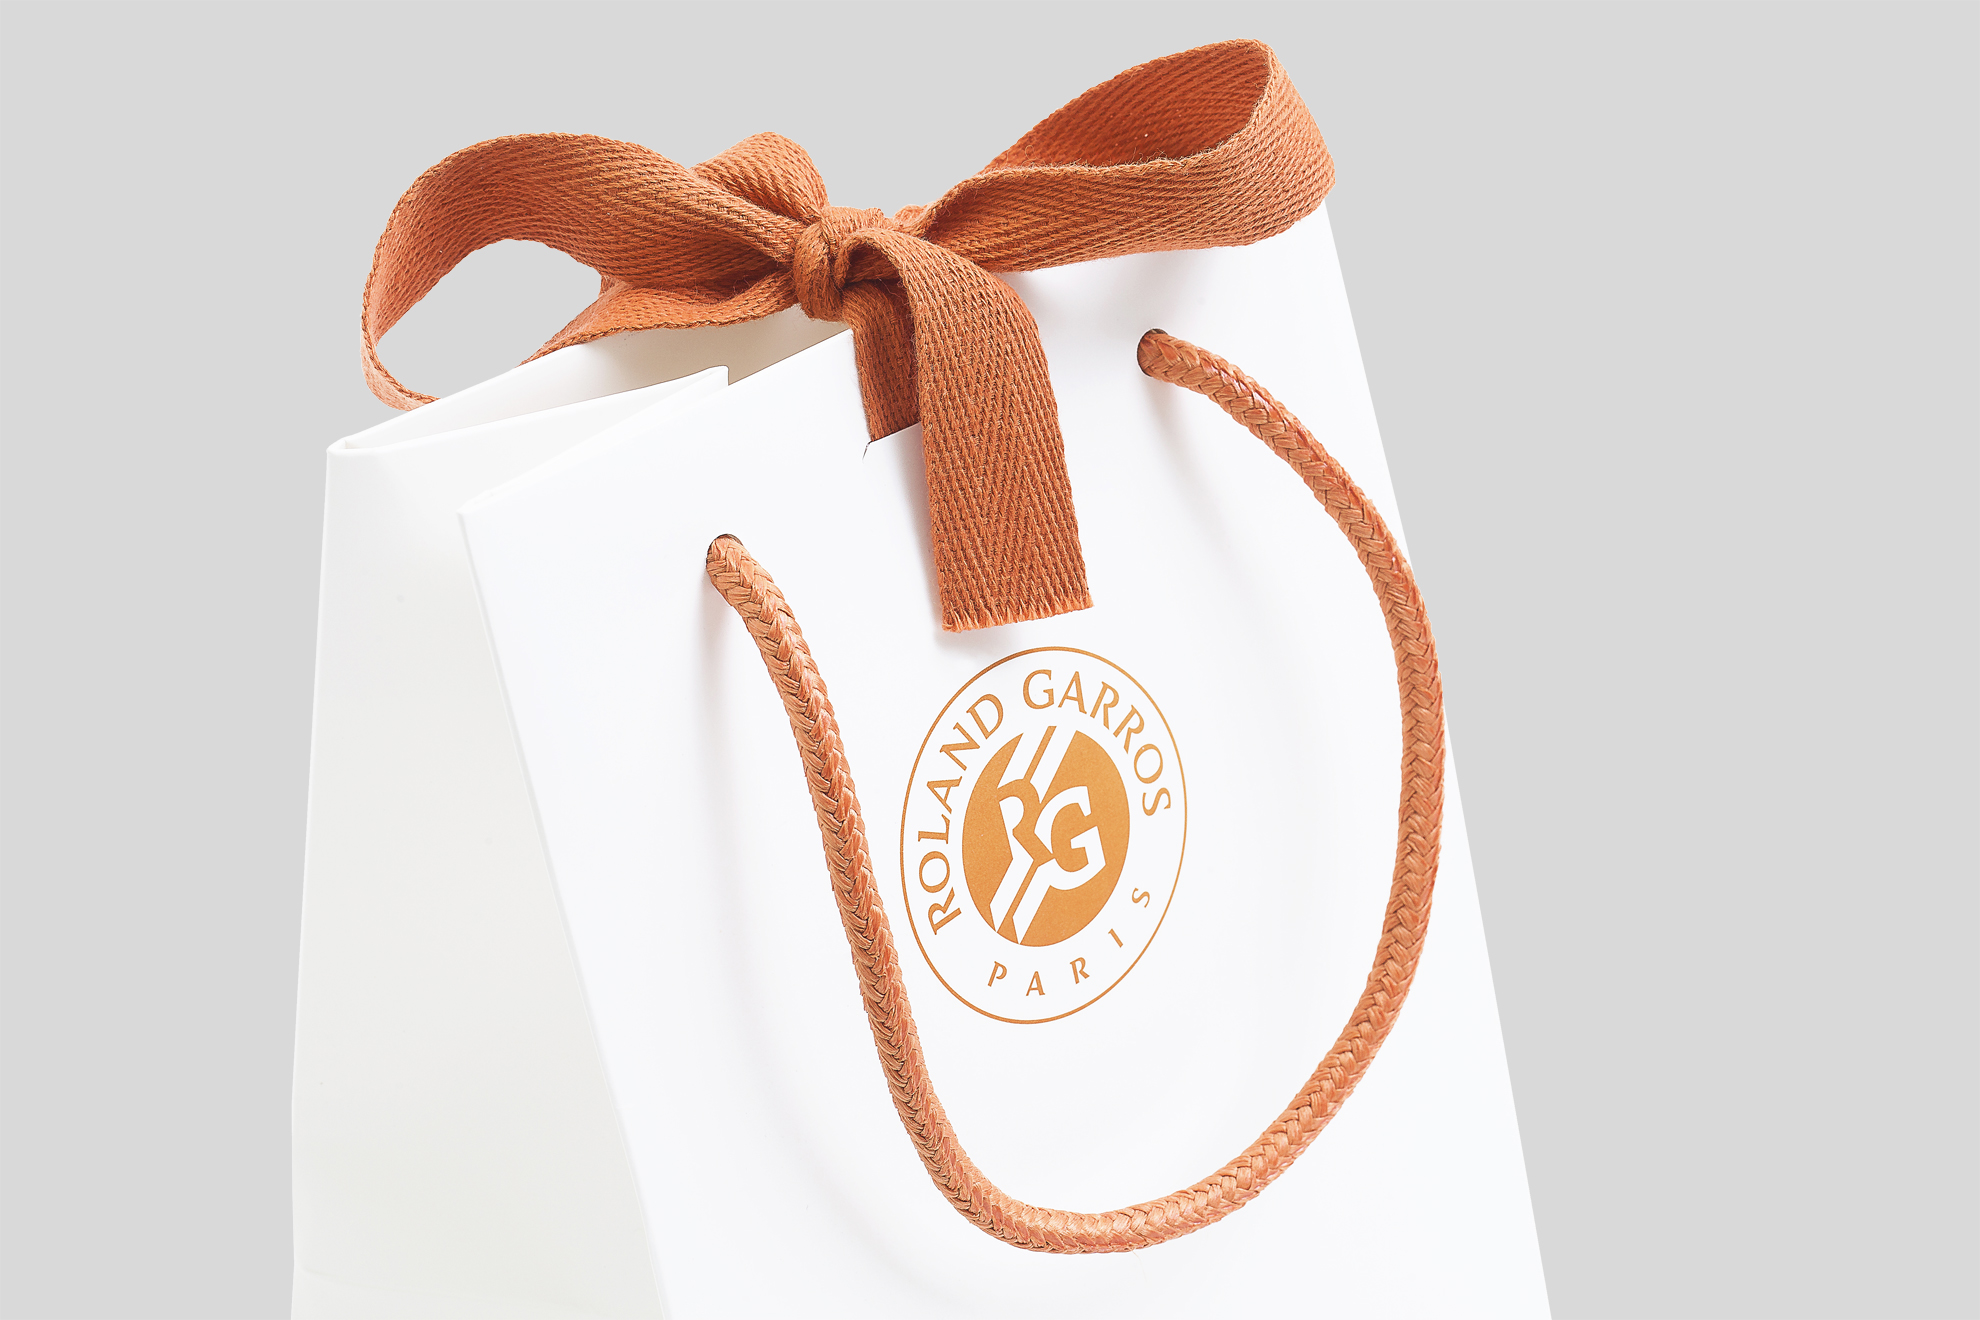 roland garros bag with ribbons